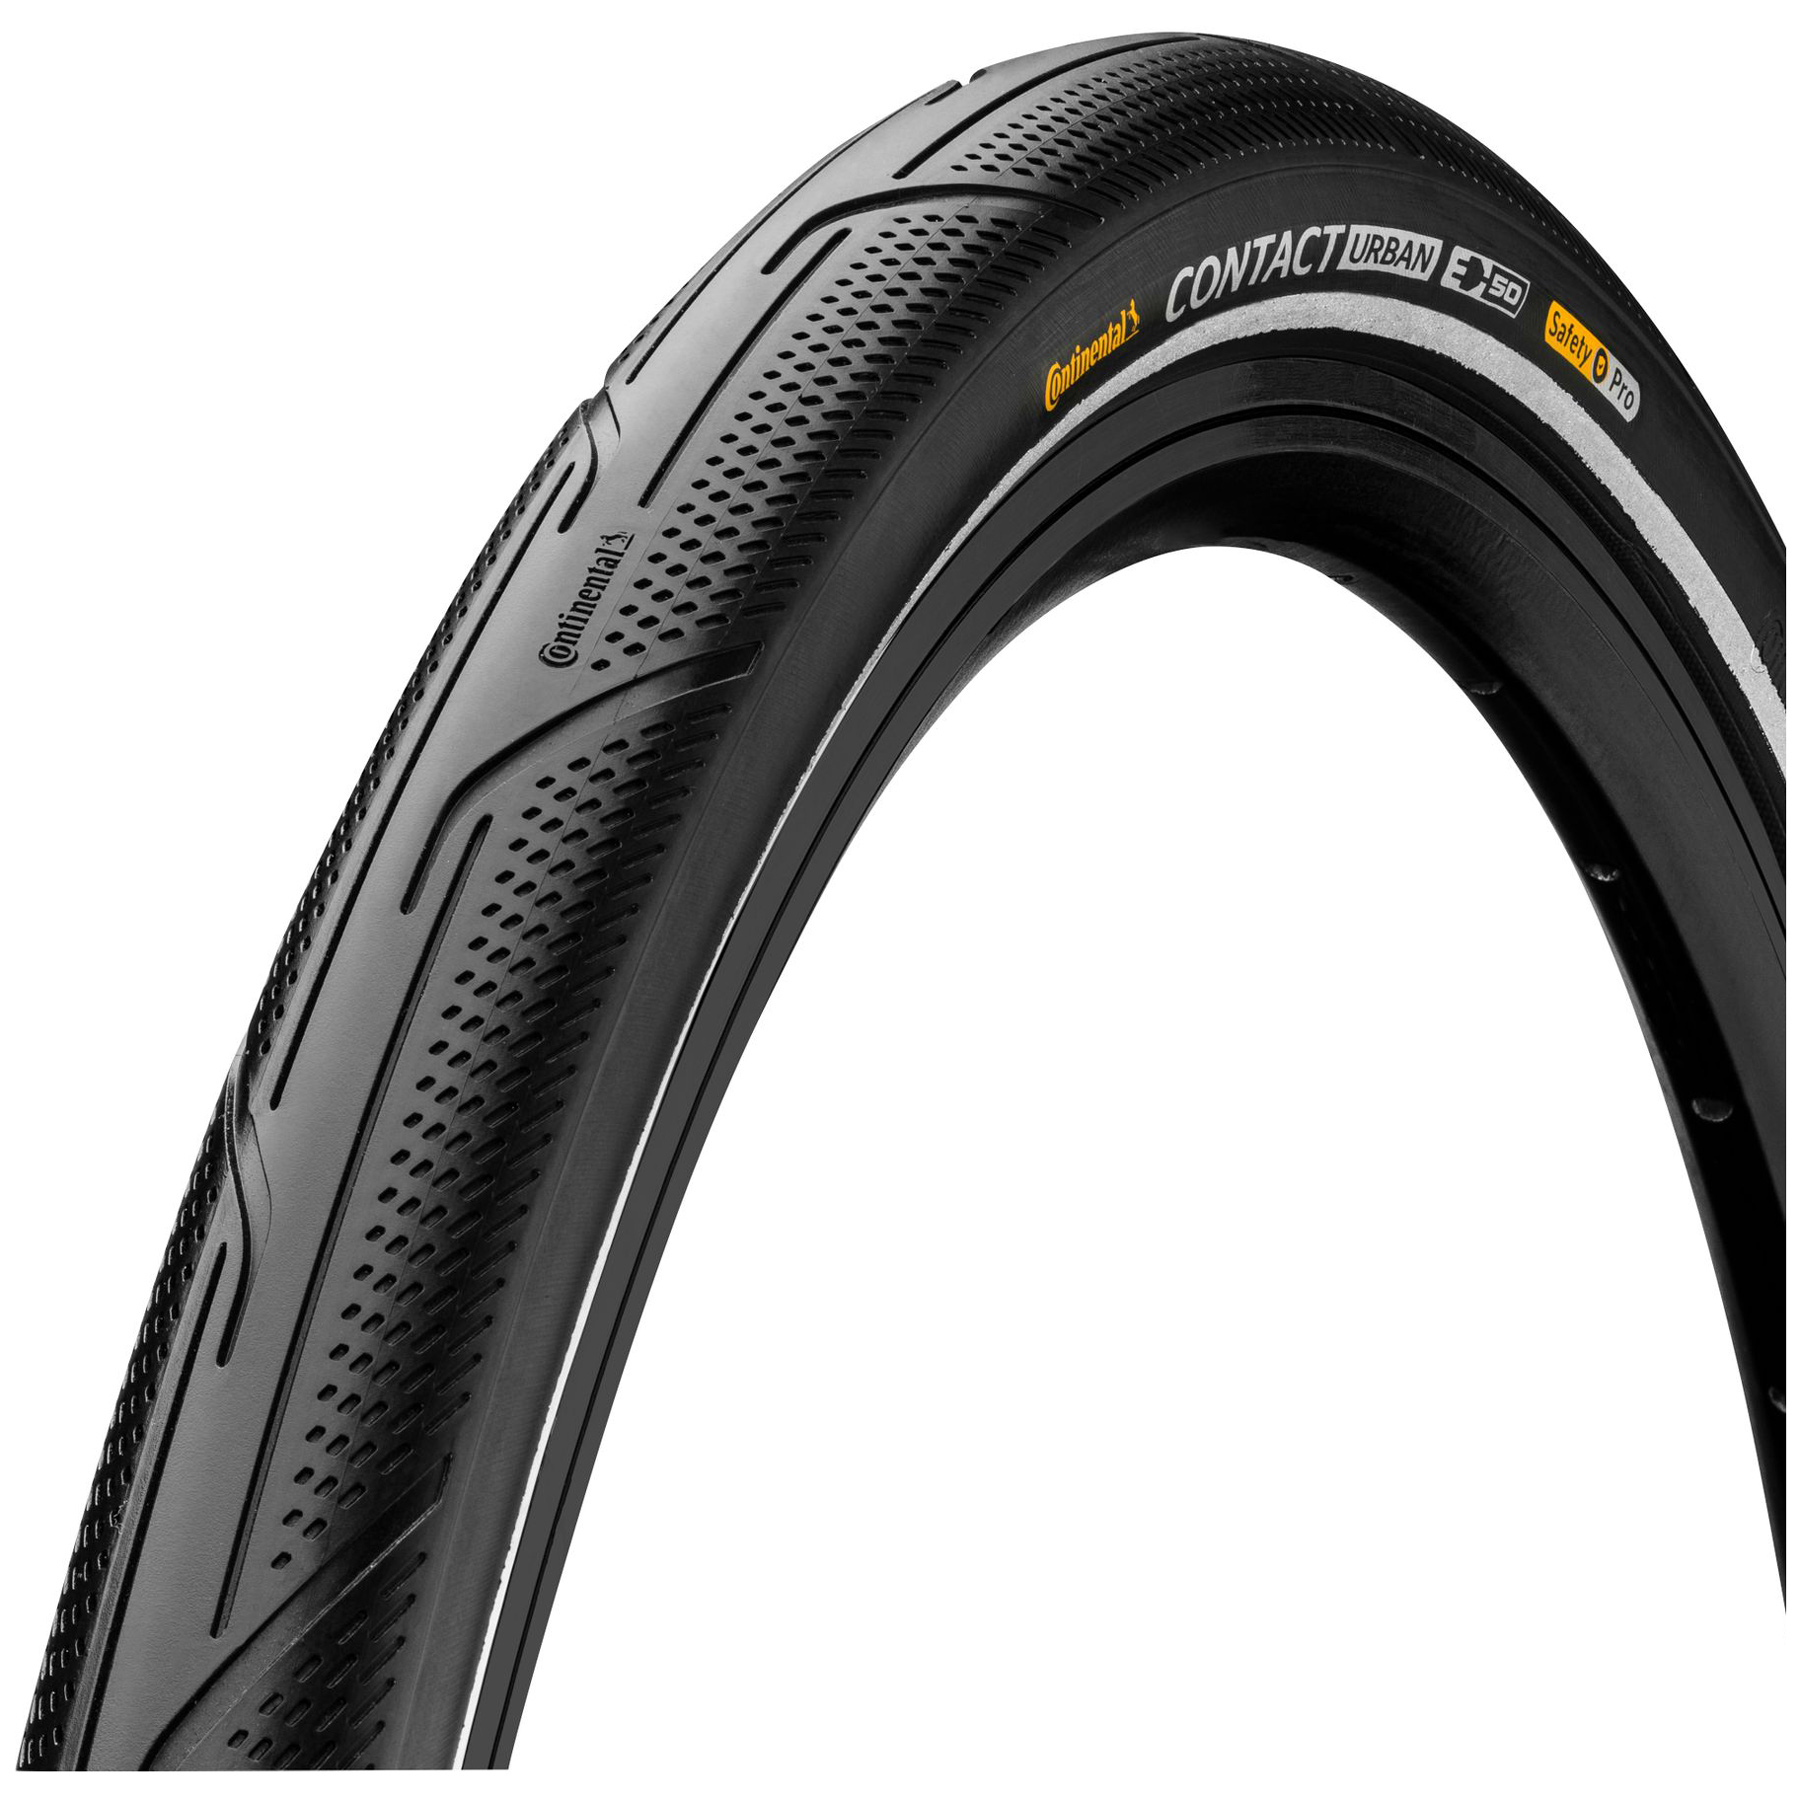 Picture of Continental Contact Urban Wire Bead Tire - PureGrip | black reflective - ECE-R75 - 32-406